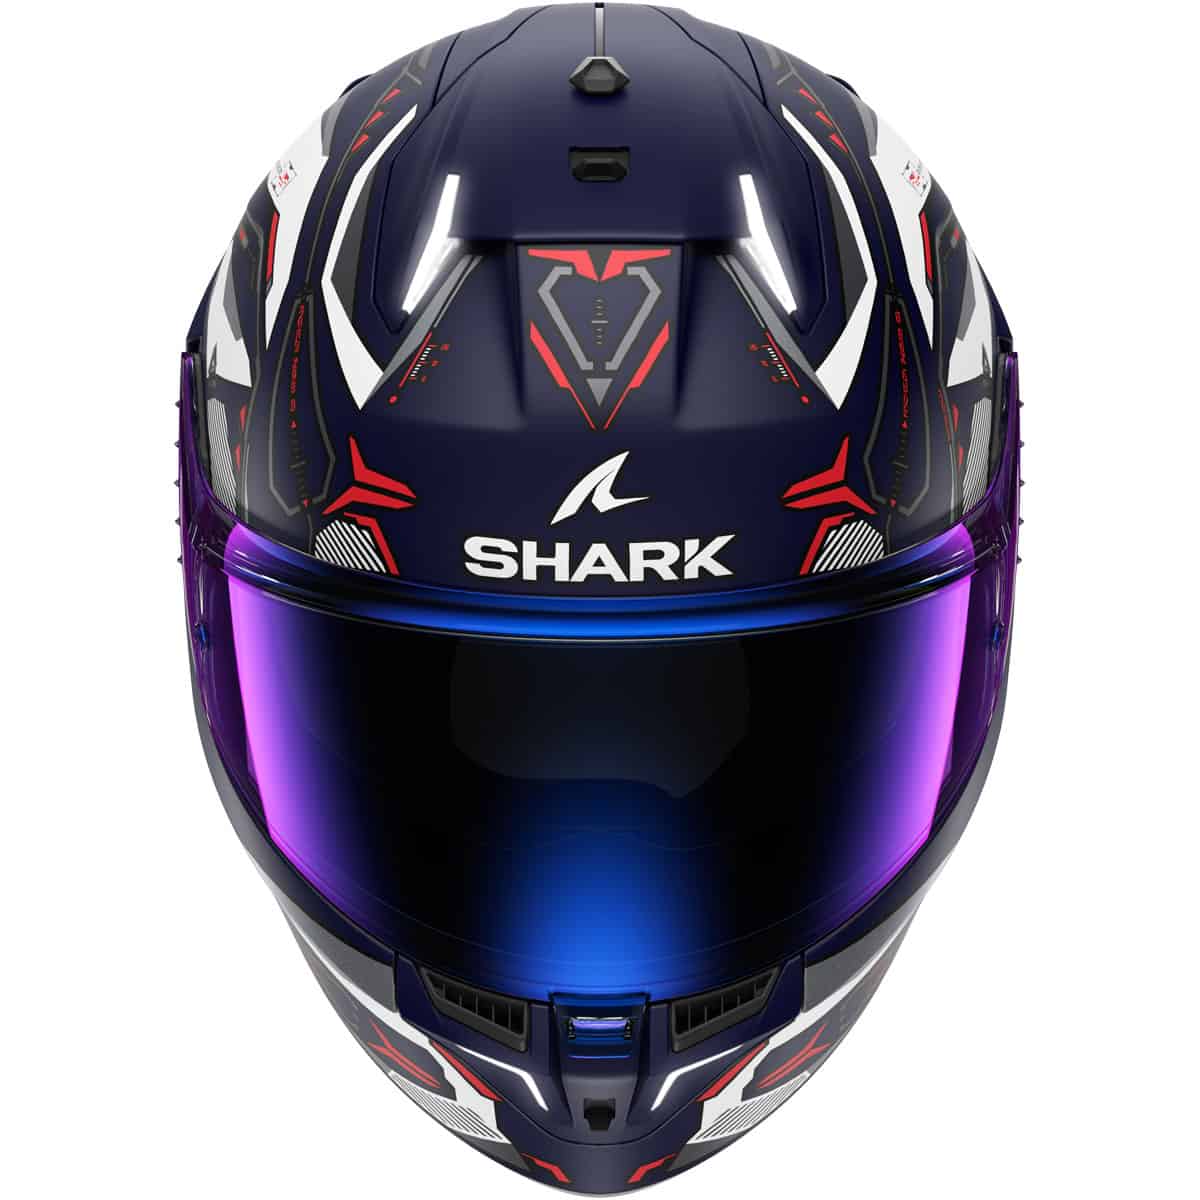 Shark Skwal i3 full face helmet: Shark were able to combine the requirements of the ECE 22-06 certification with a compact and original design inspired by motorsports and leading edge technology. 5